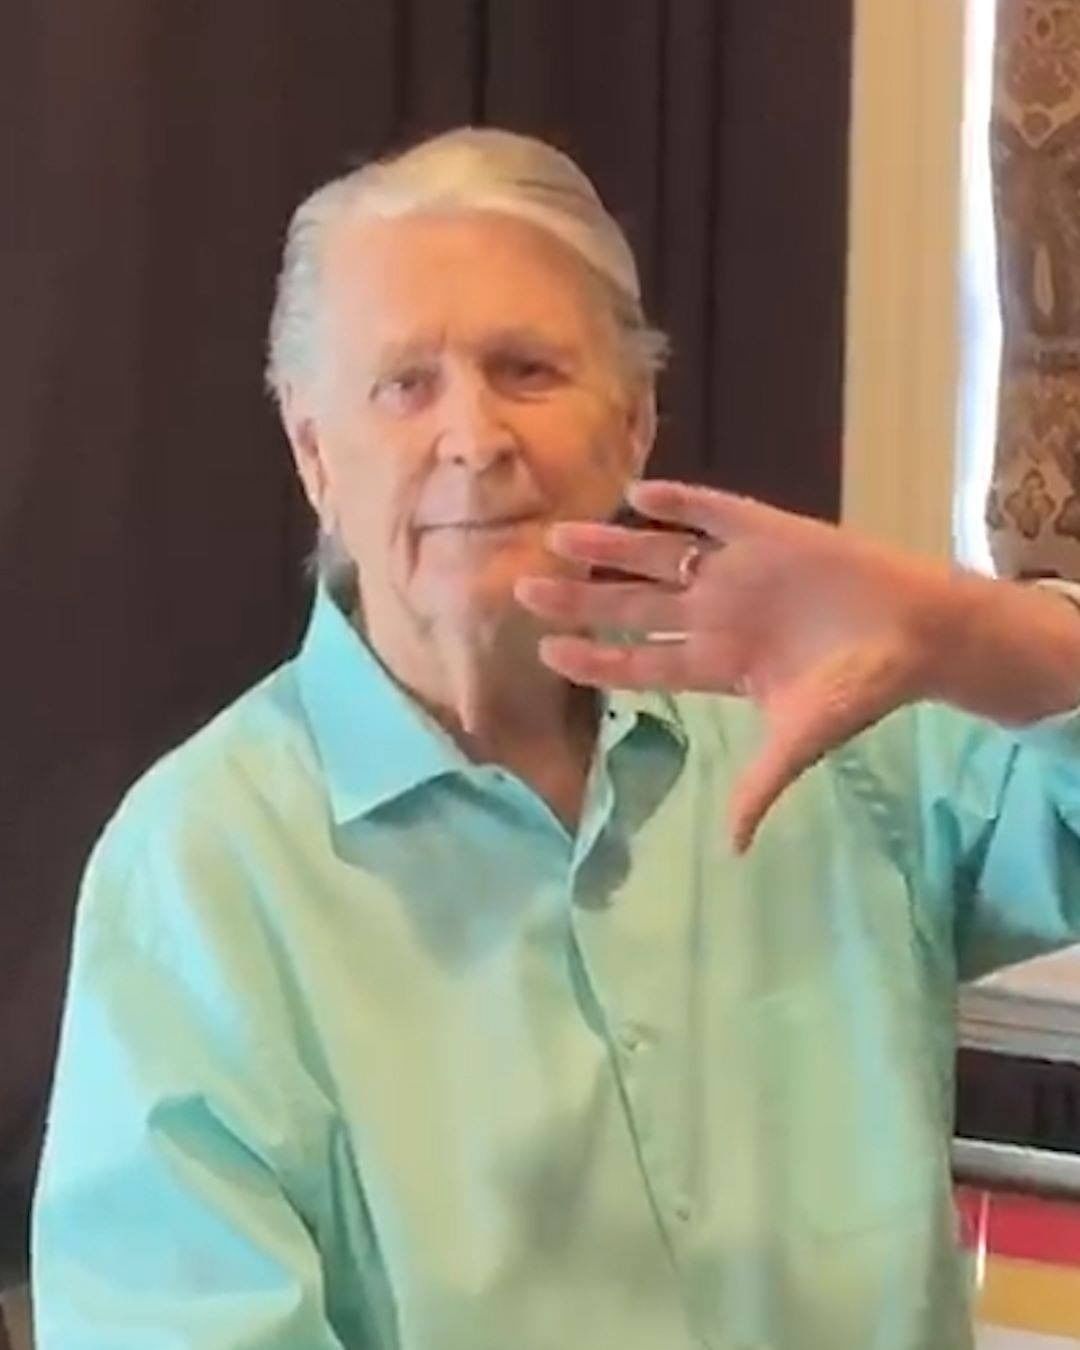 Stella McCartney - Legendary #TheBeachBoys singer @BrianWilsonLive does an acapella rendition of #TheBeatles’ iconic song Hey Jude for #Stellafest, having also performed at our Stella Amoeba Music eve...